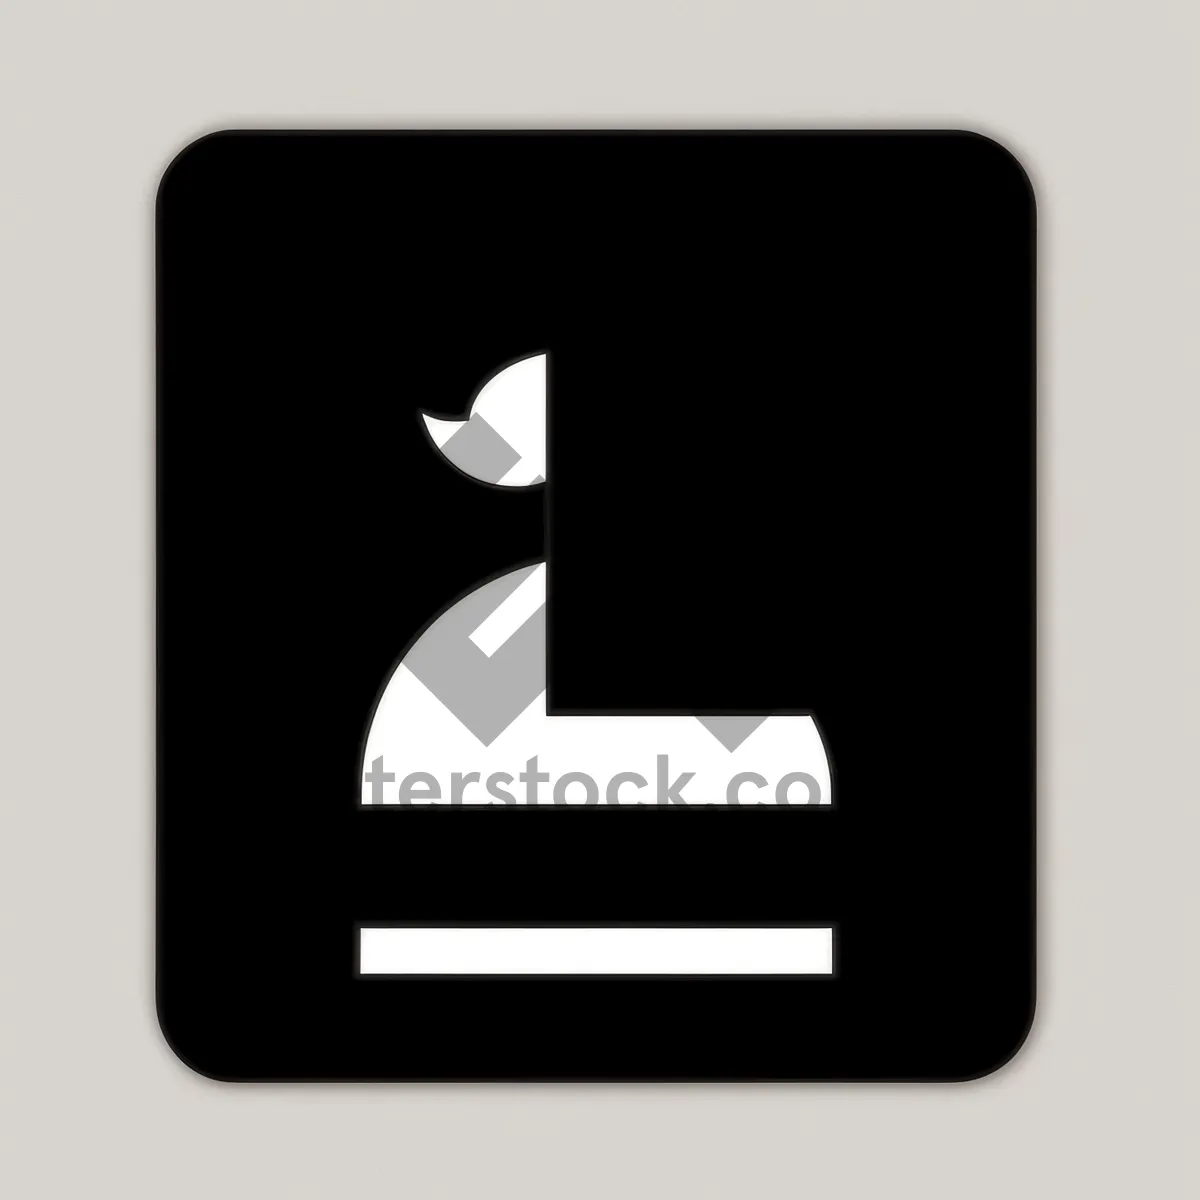 Picture of Modern Shiny Black Button with Key Icon